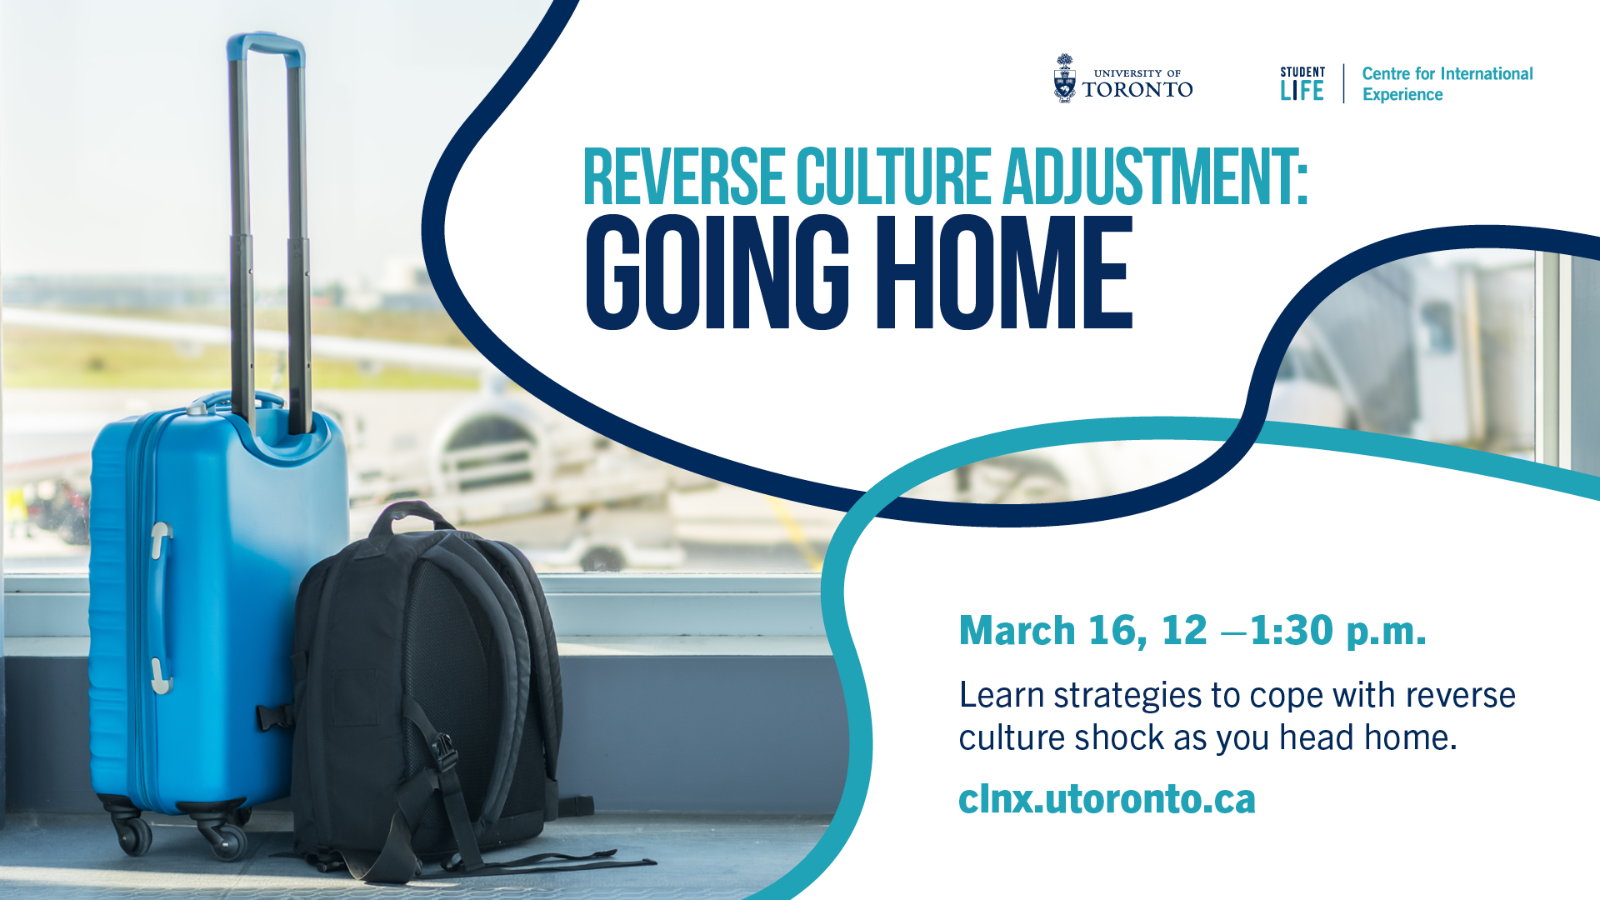 A photo of luggages at the airport with text "Reverse culture adjustment: Going home; March 16, 12-1:30 PM; Learn strategies to cope with reverse culture shock as you head home."